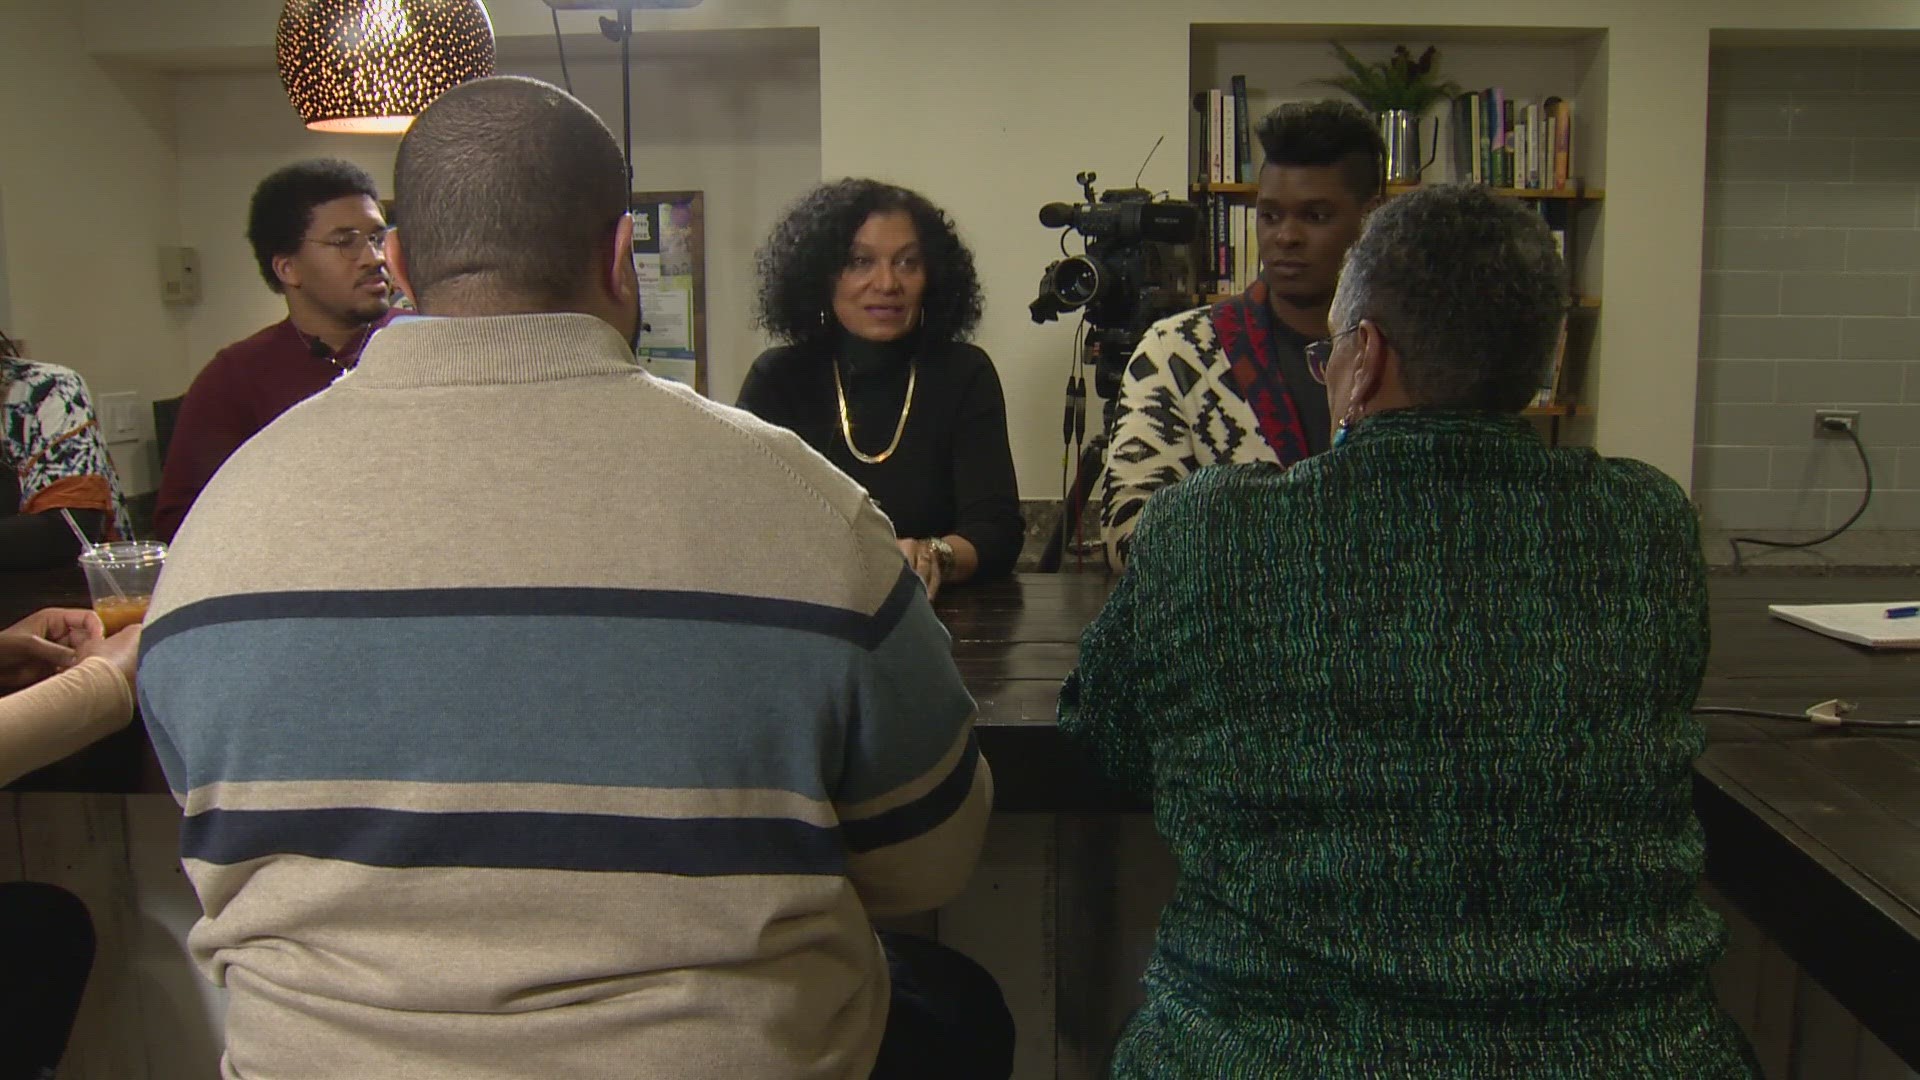 Denver's most prominent Black voices discuss how 9NEWS storytelling is viewed in the community.